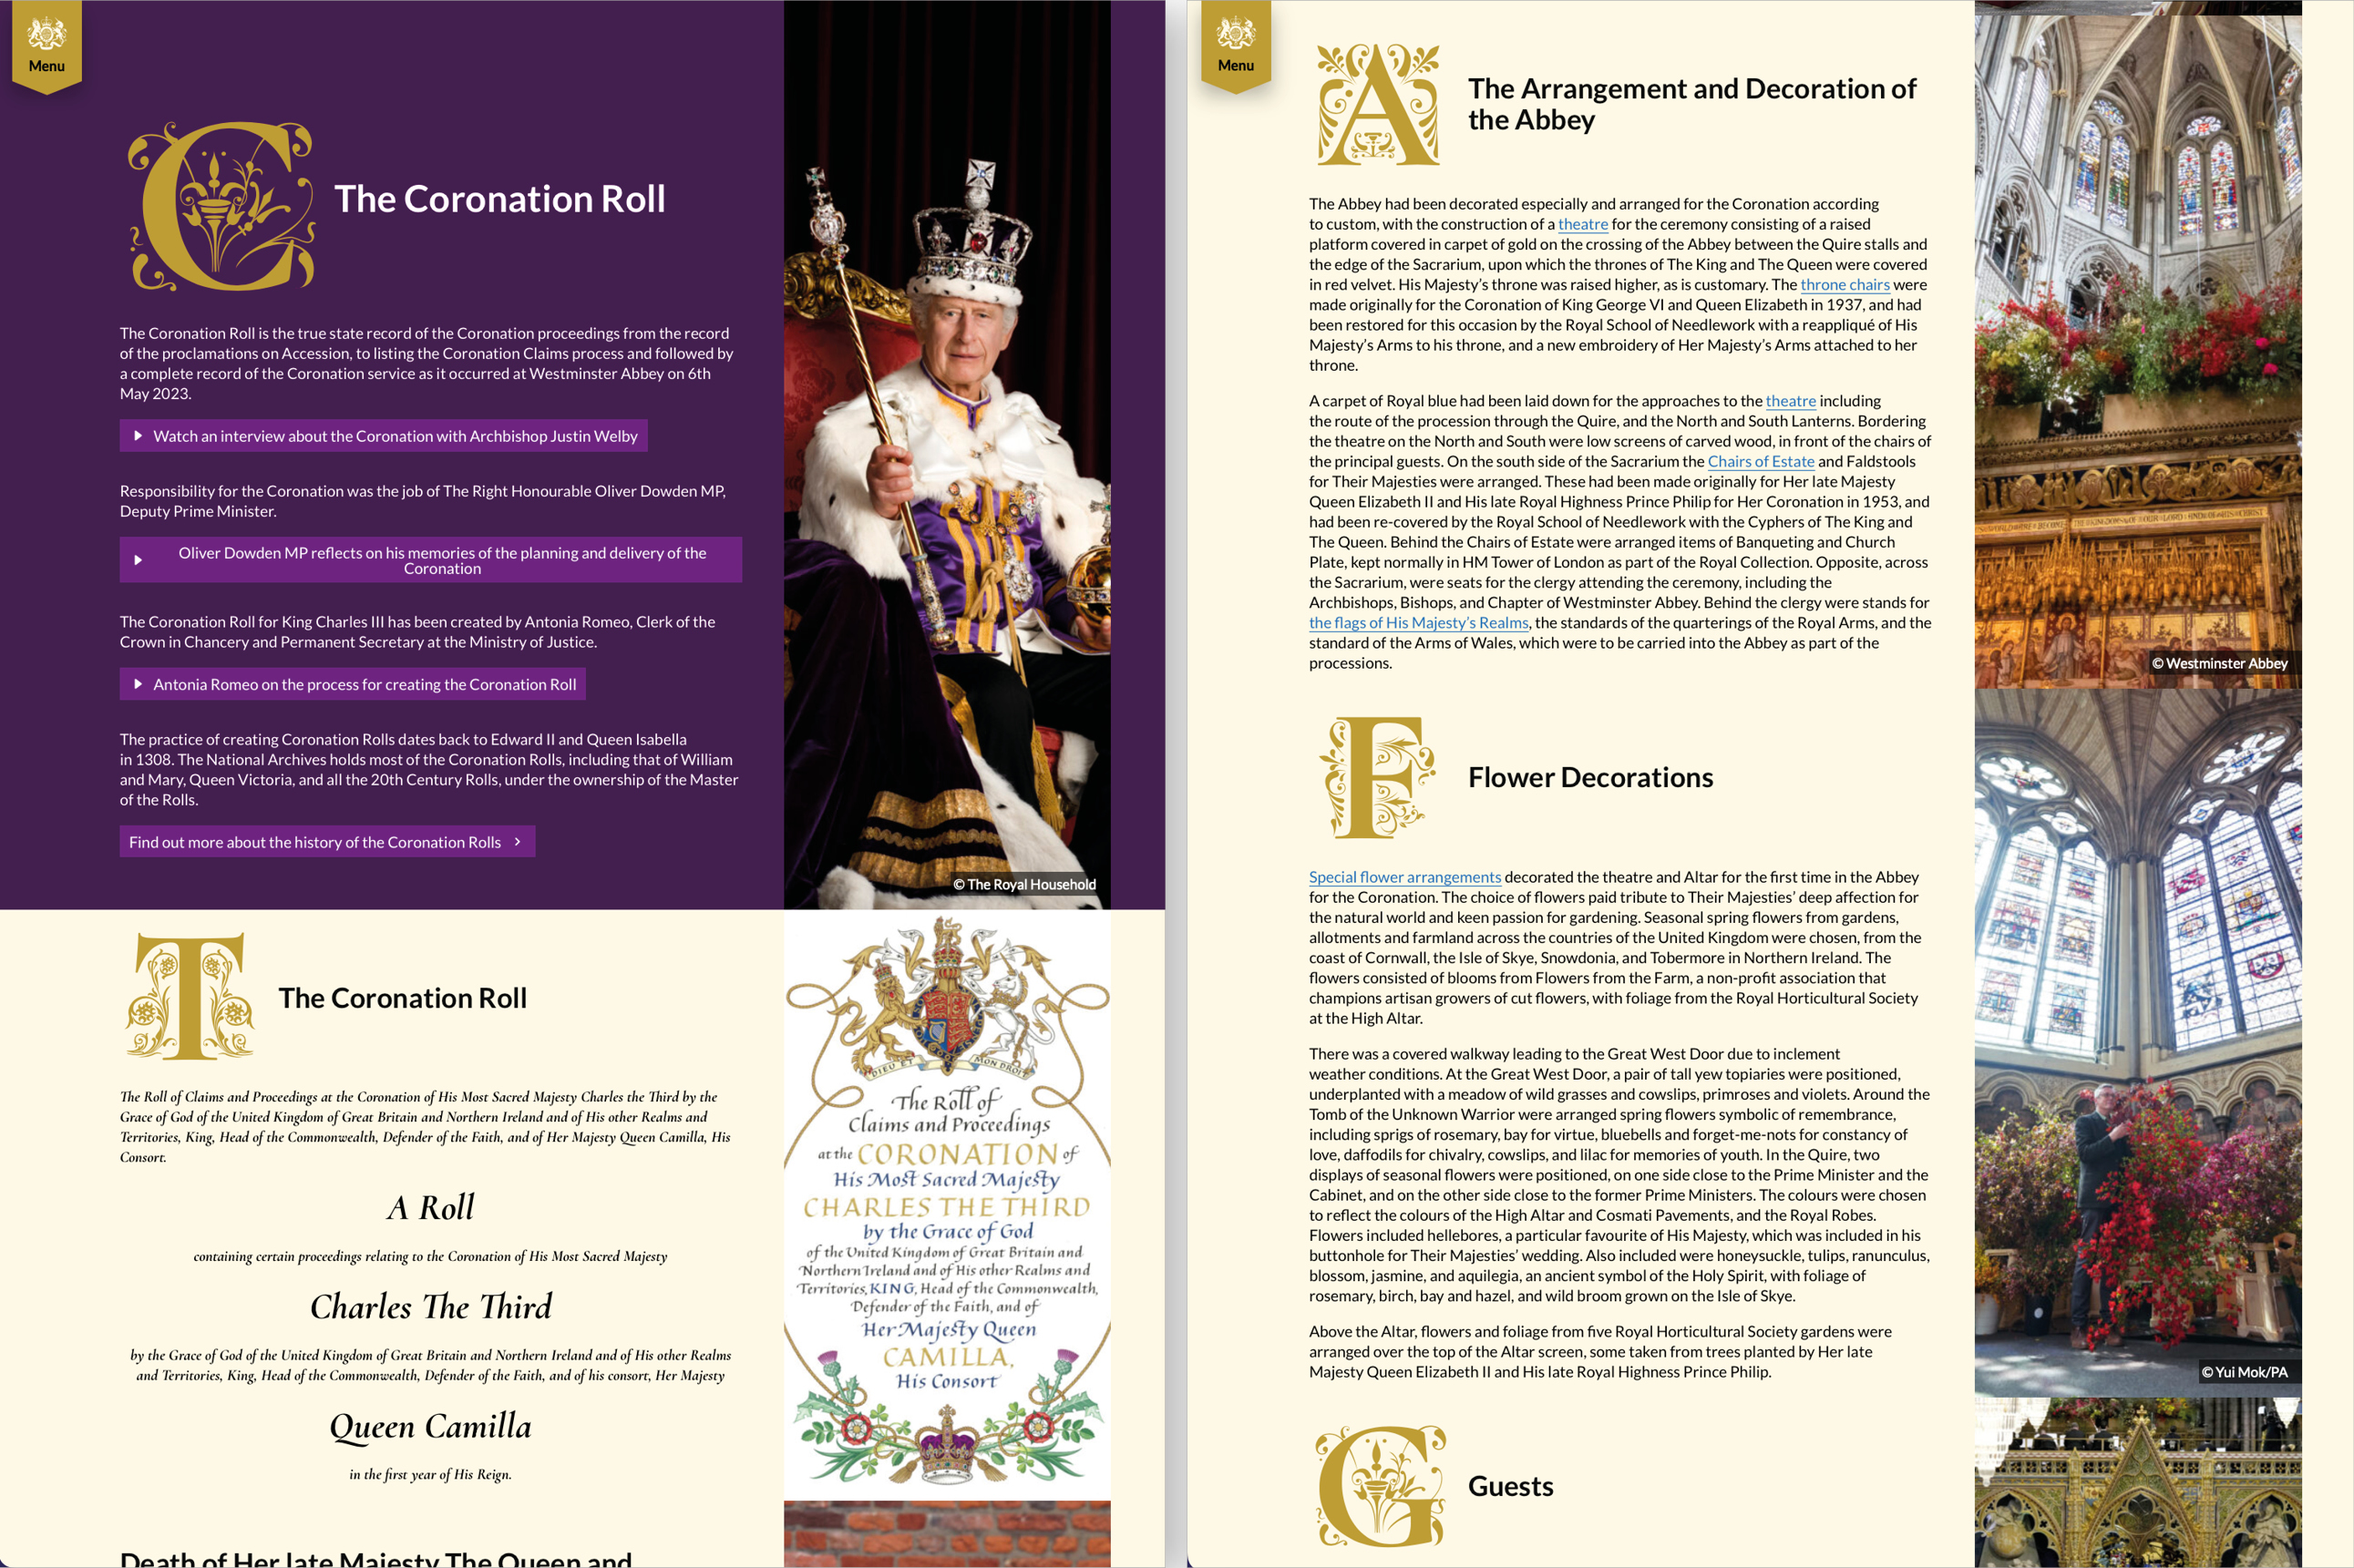 Examples from the website version of the Coronation Roll